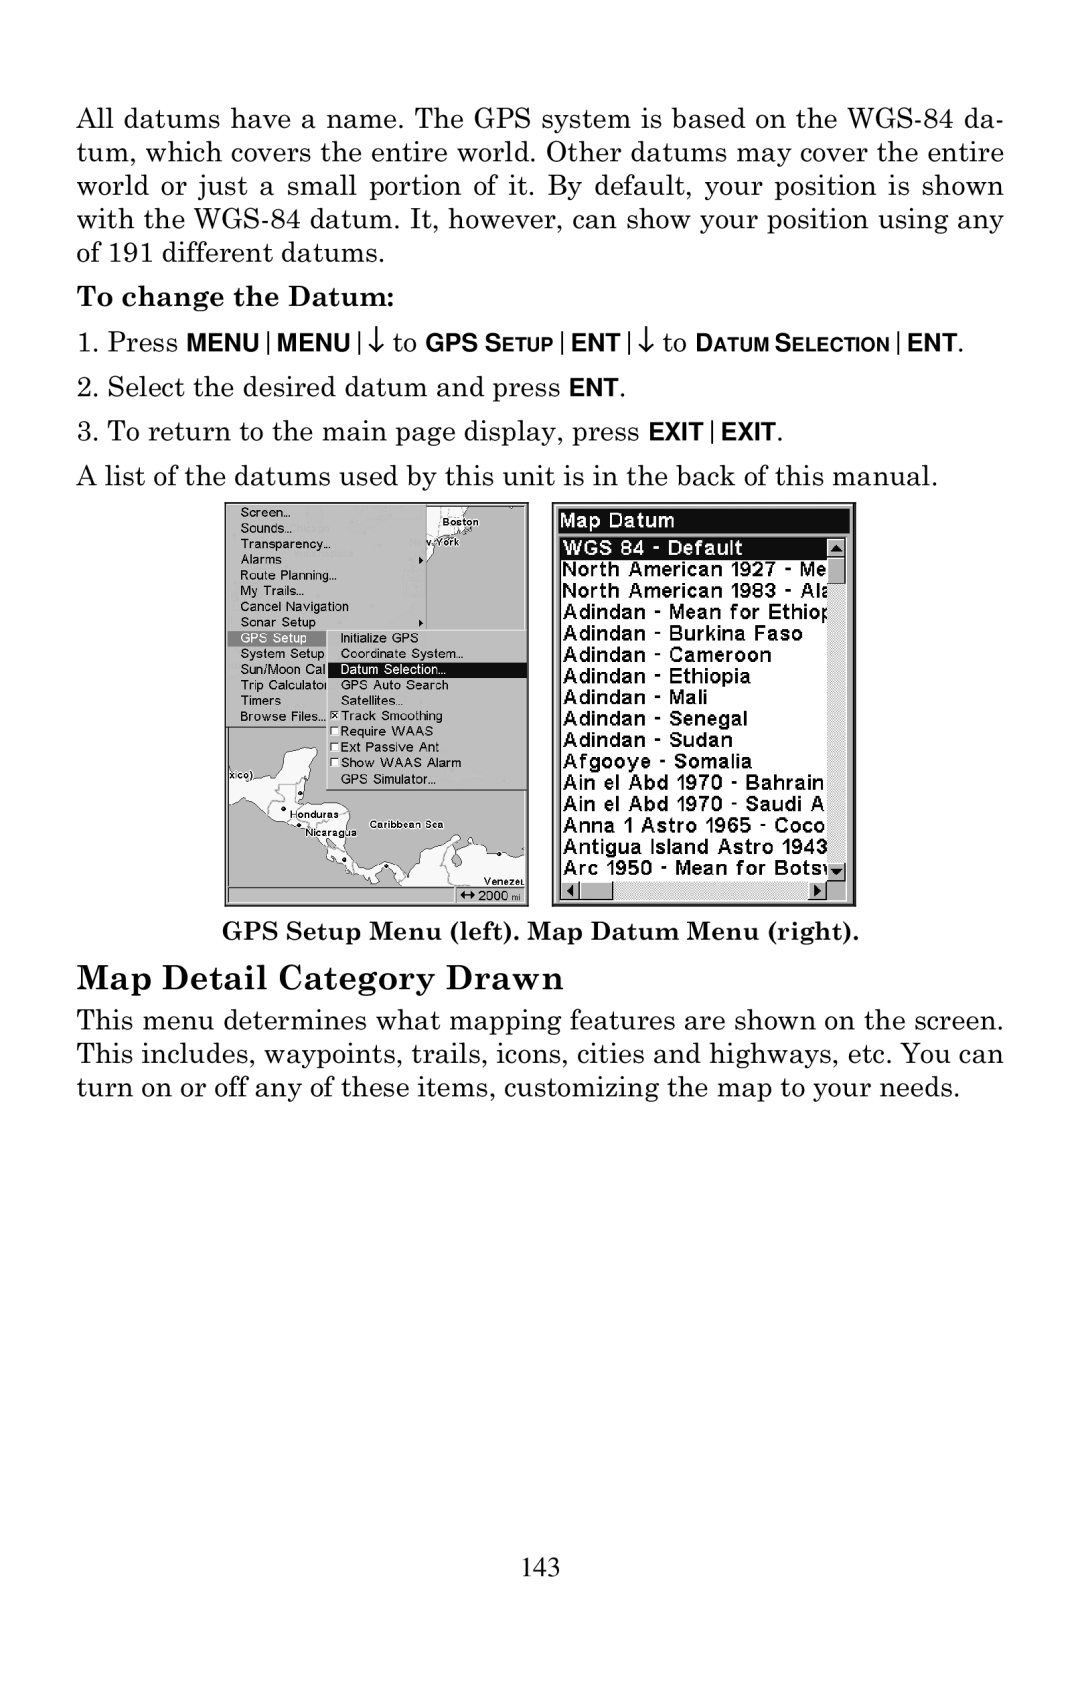 Eagle Electronics 640C, 640cDF manual Map Detail Category Drawn, To change the Datum 